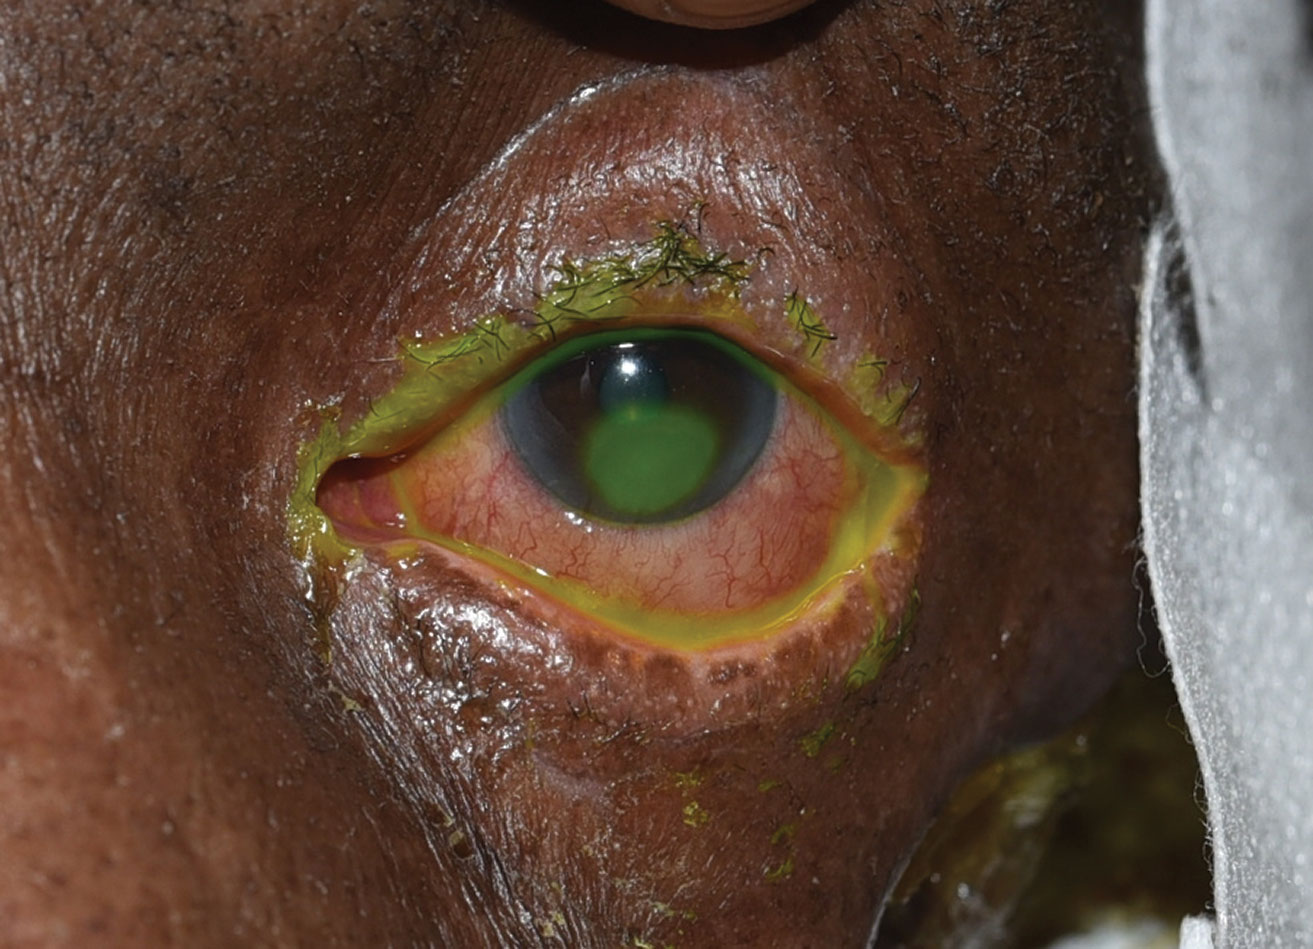 This patient displays an inferior corneal epithelial defect seen in neurotrophic keratopathy.